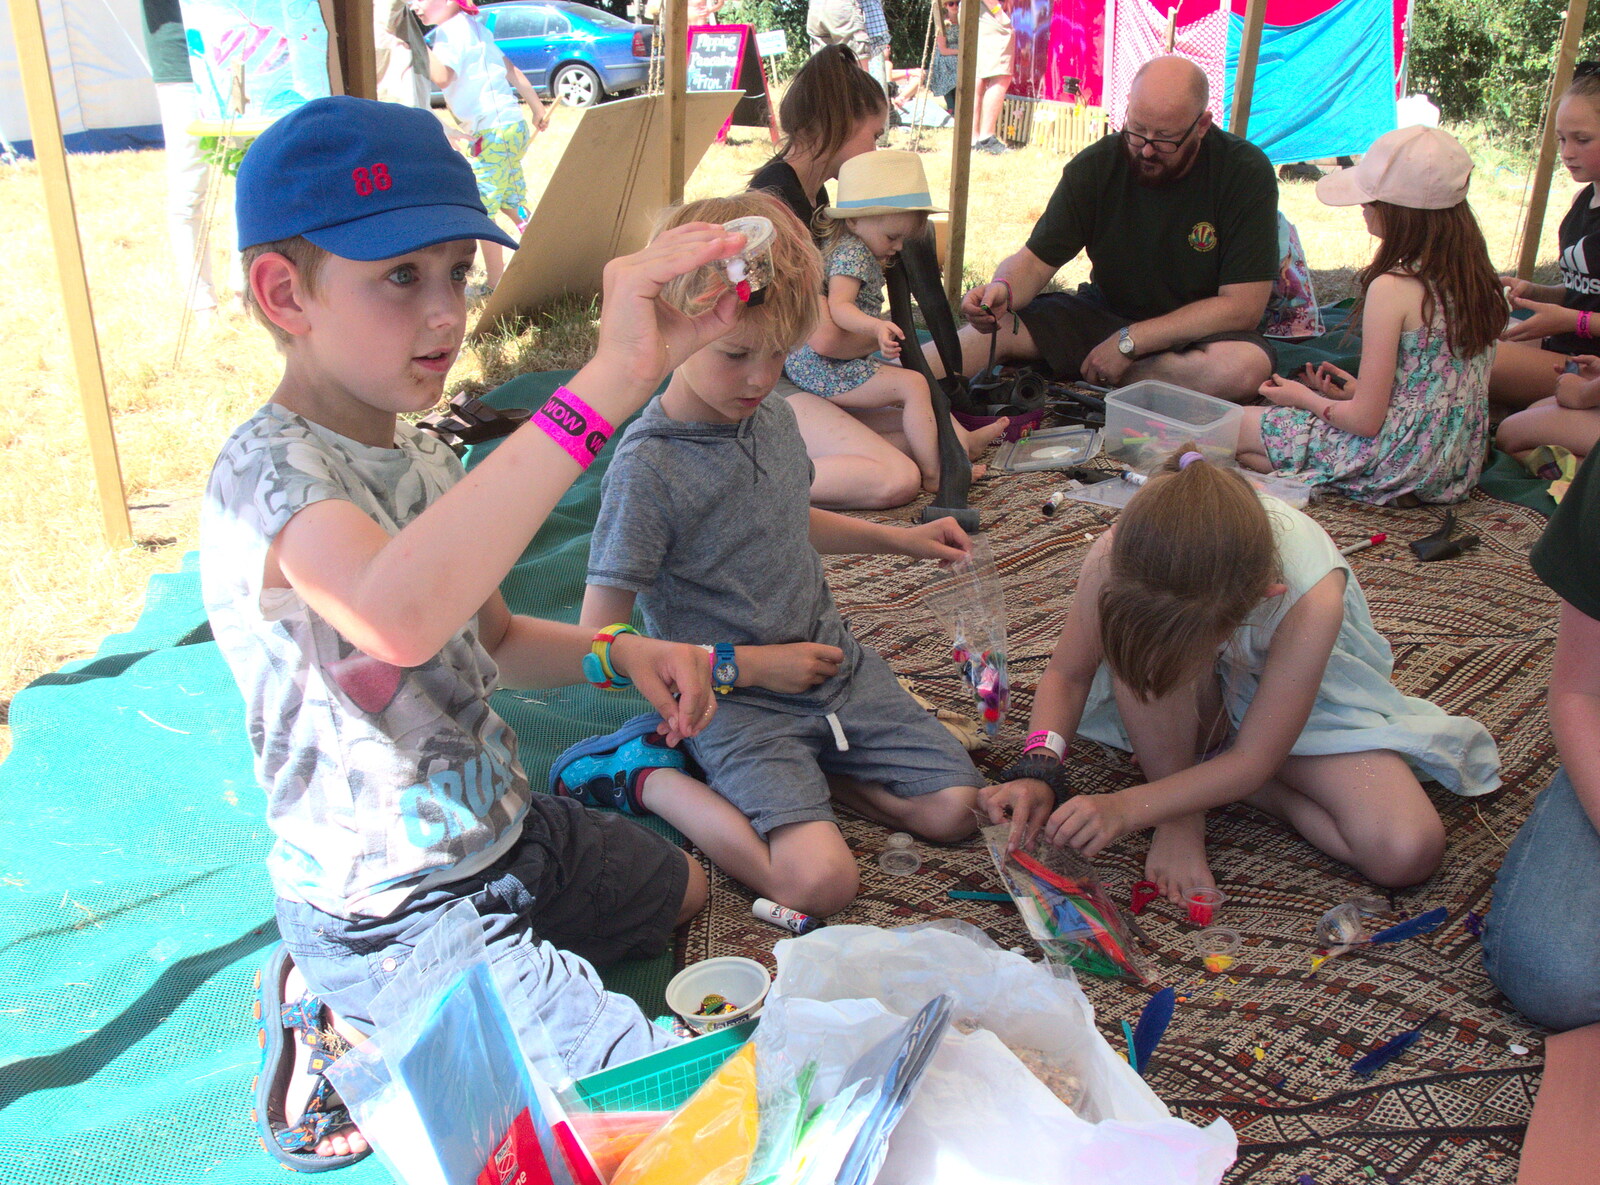 Fred and Harry are doing crafts from WoW Festival, Burston, Norfolk - 29th June - 1st July 2018